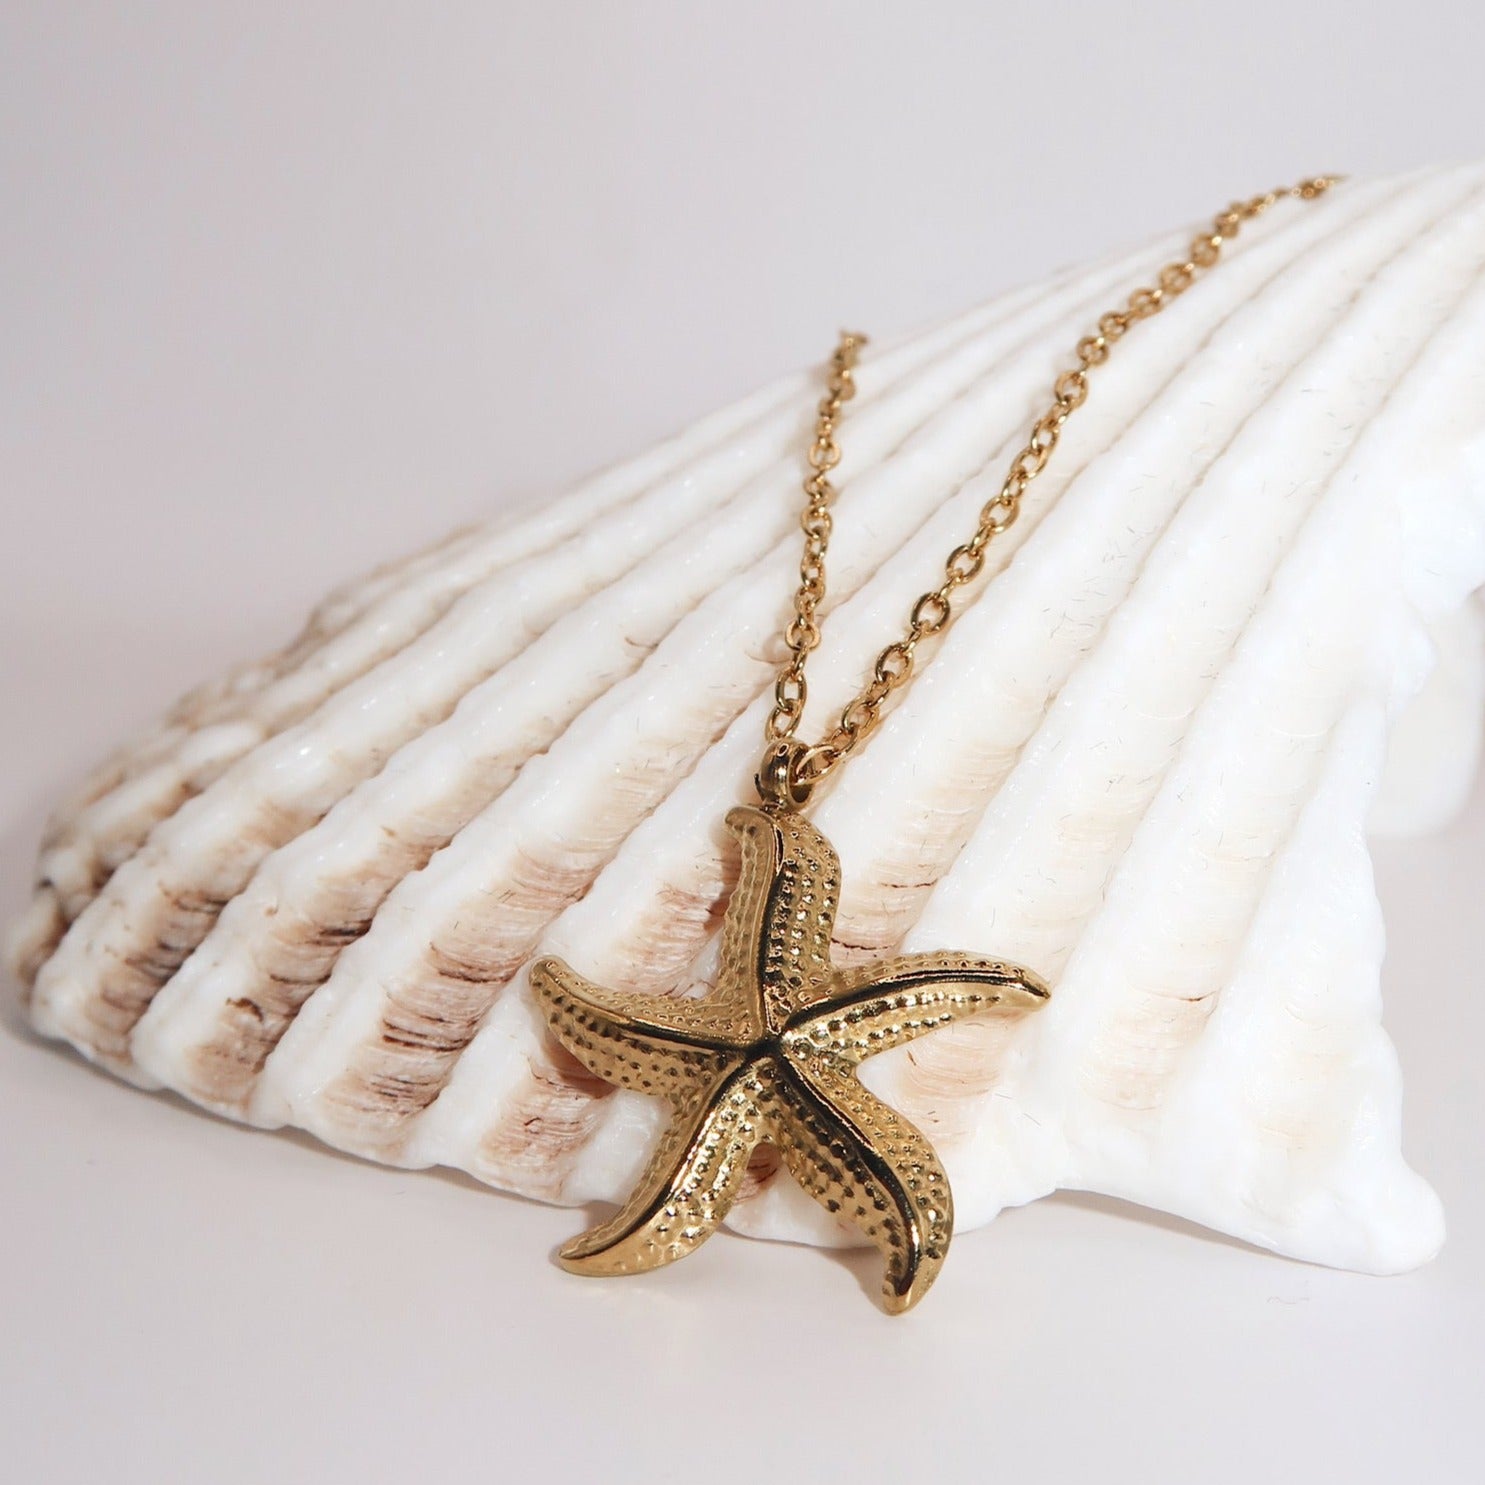 ADDISON - 18K PVD Gold Plated Dainty Starfish Pendant Necklace - Mixed Metals